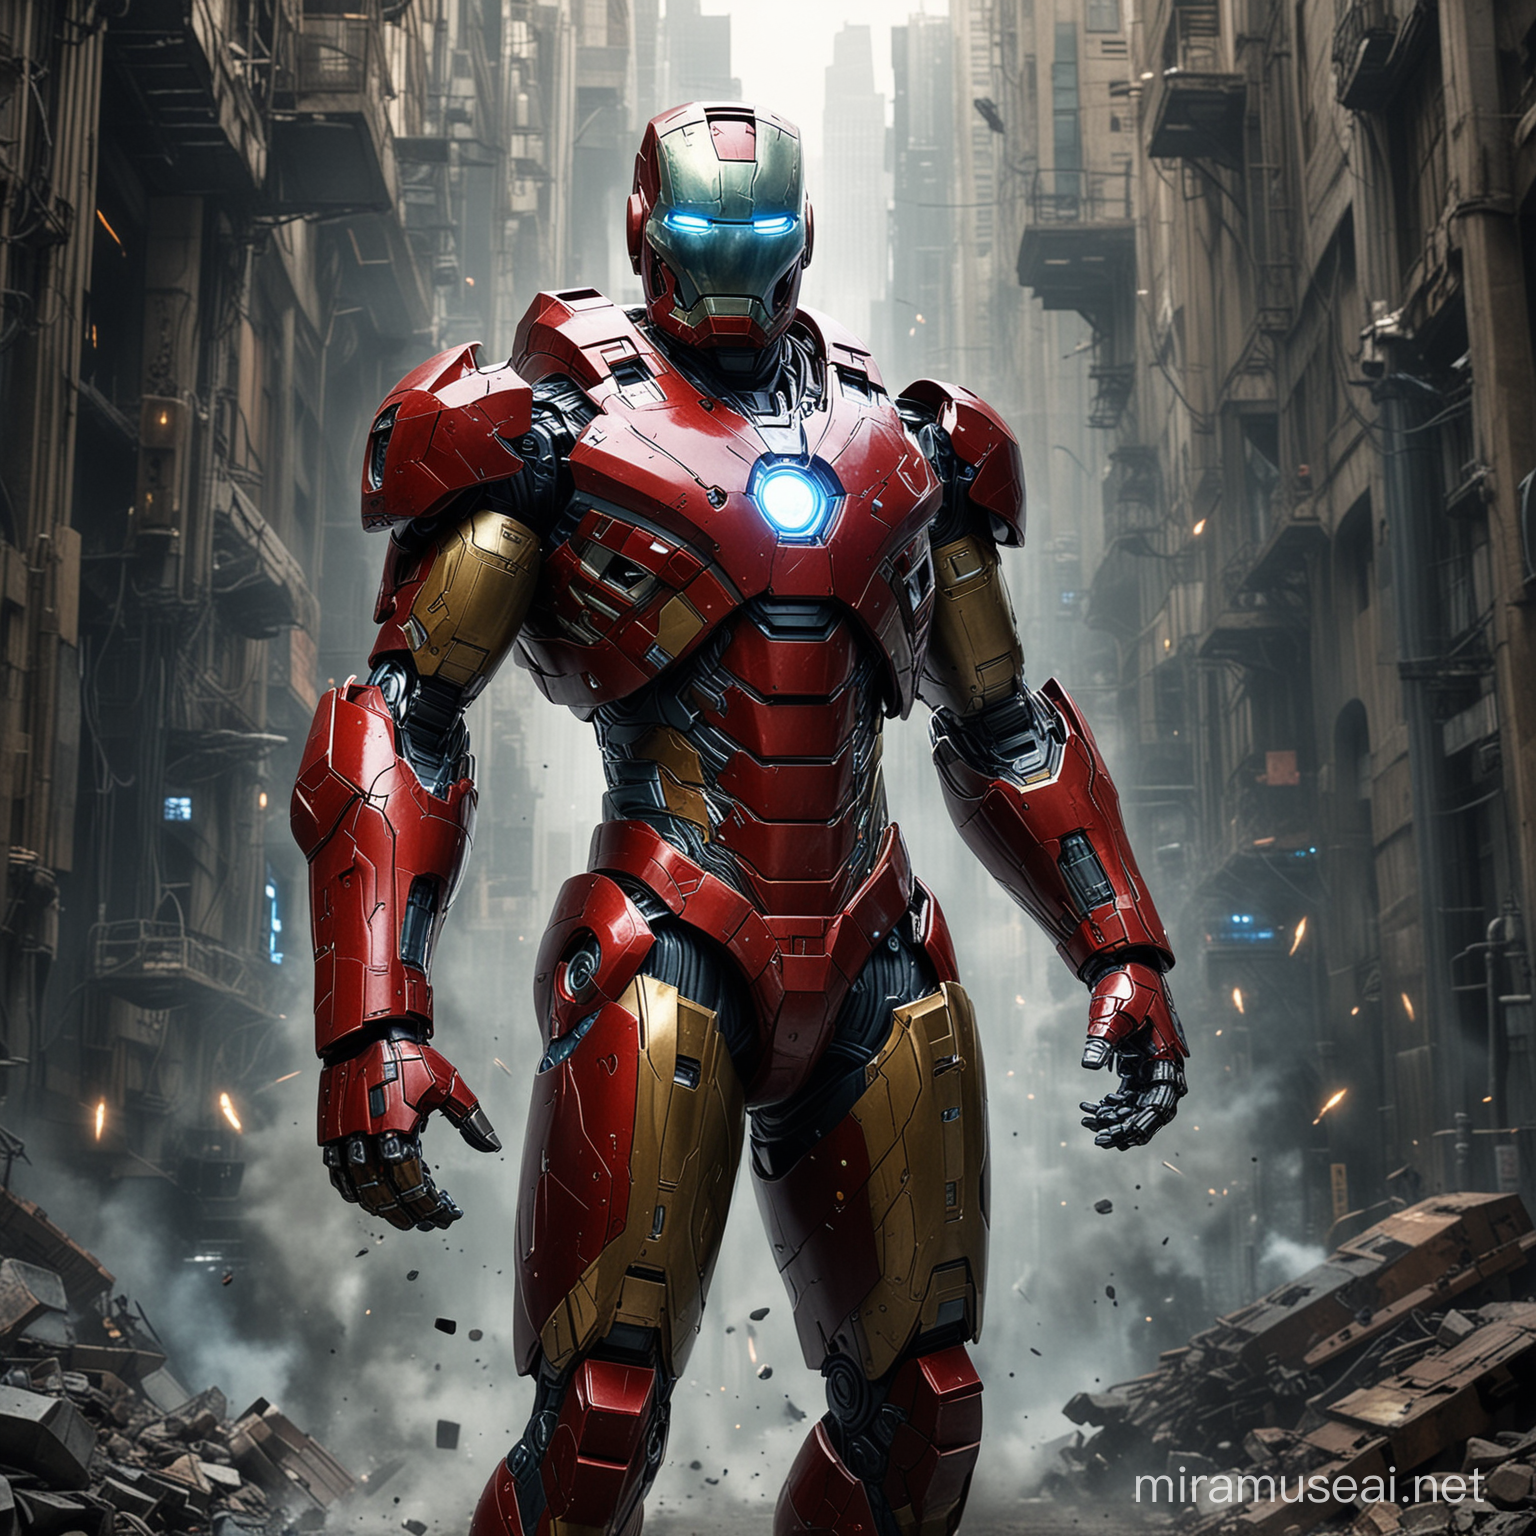 Dynamic Iron Man Illustration Technological Marvel Revealed in Intricate Lines